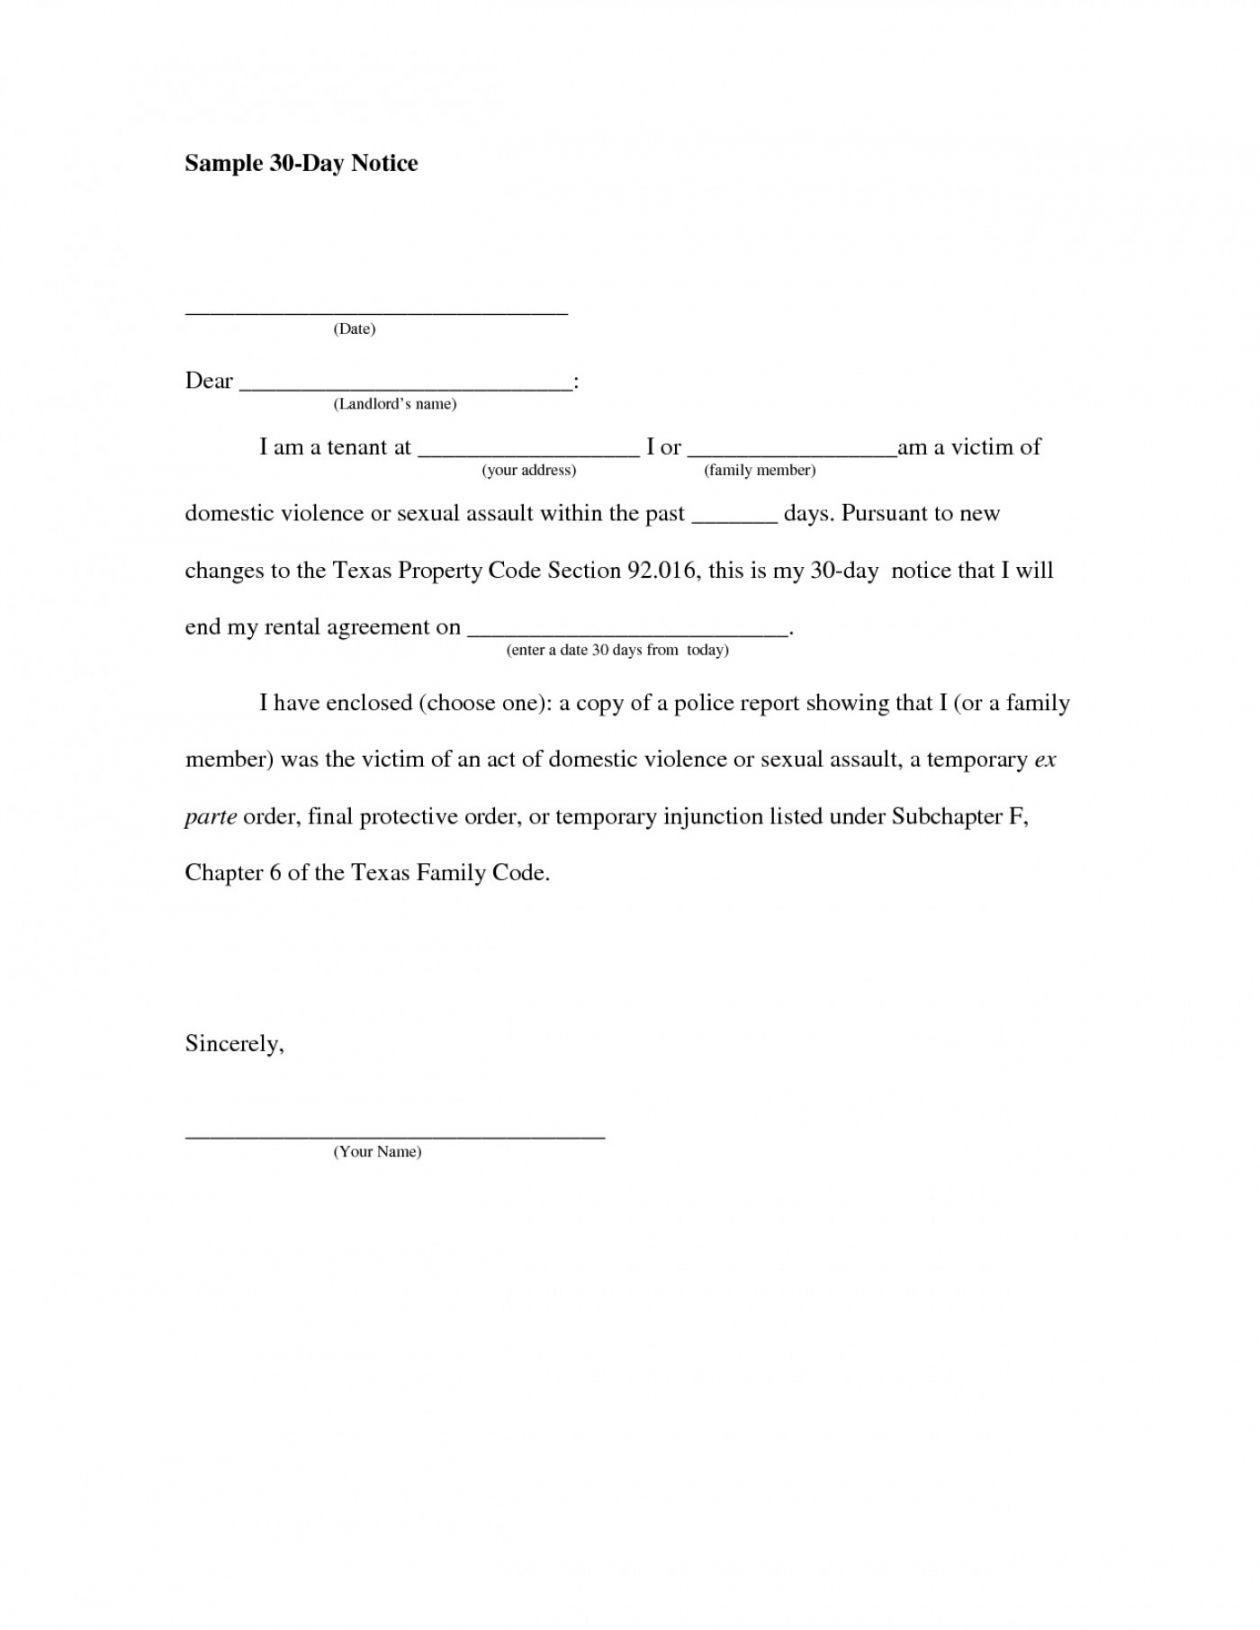 Get Our Example Of Template For 30 Days Notice To Landlord with Moving Out Notice Letter Template